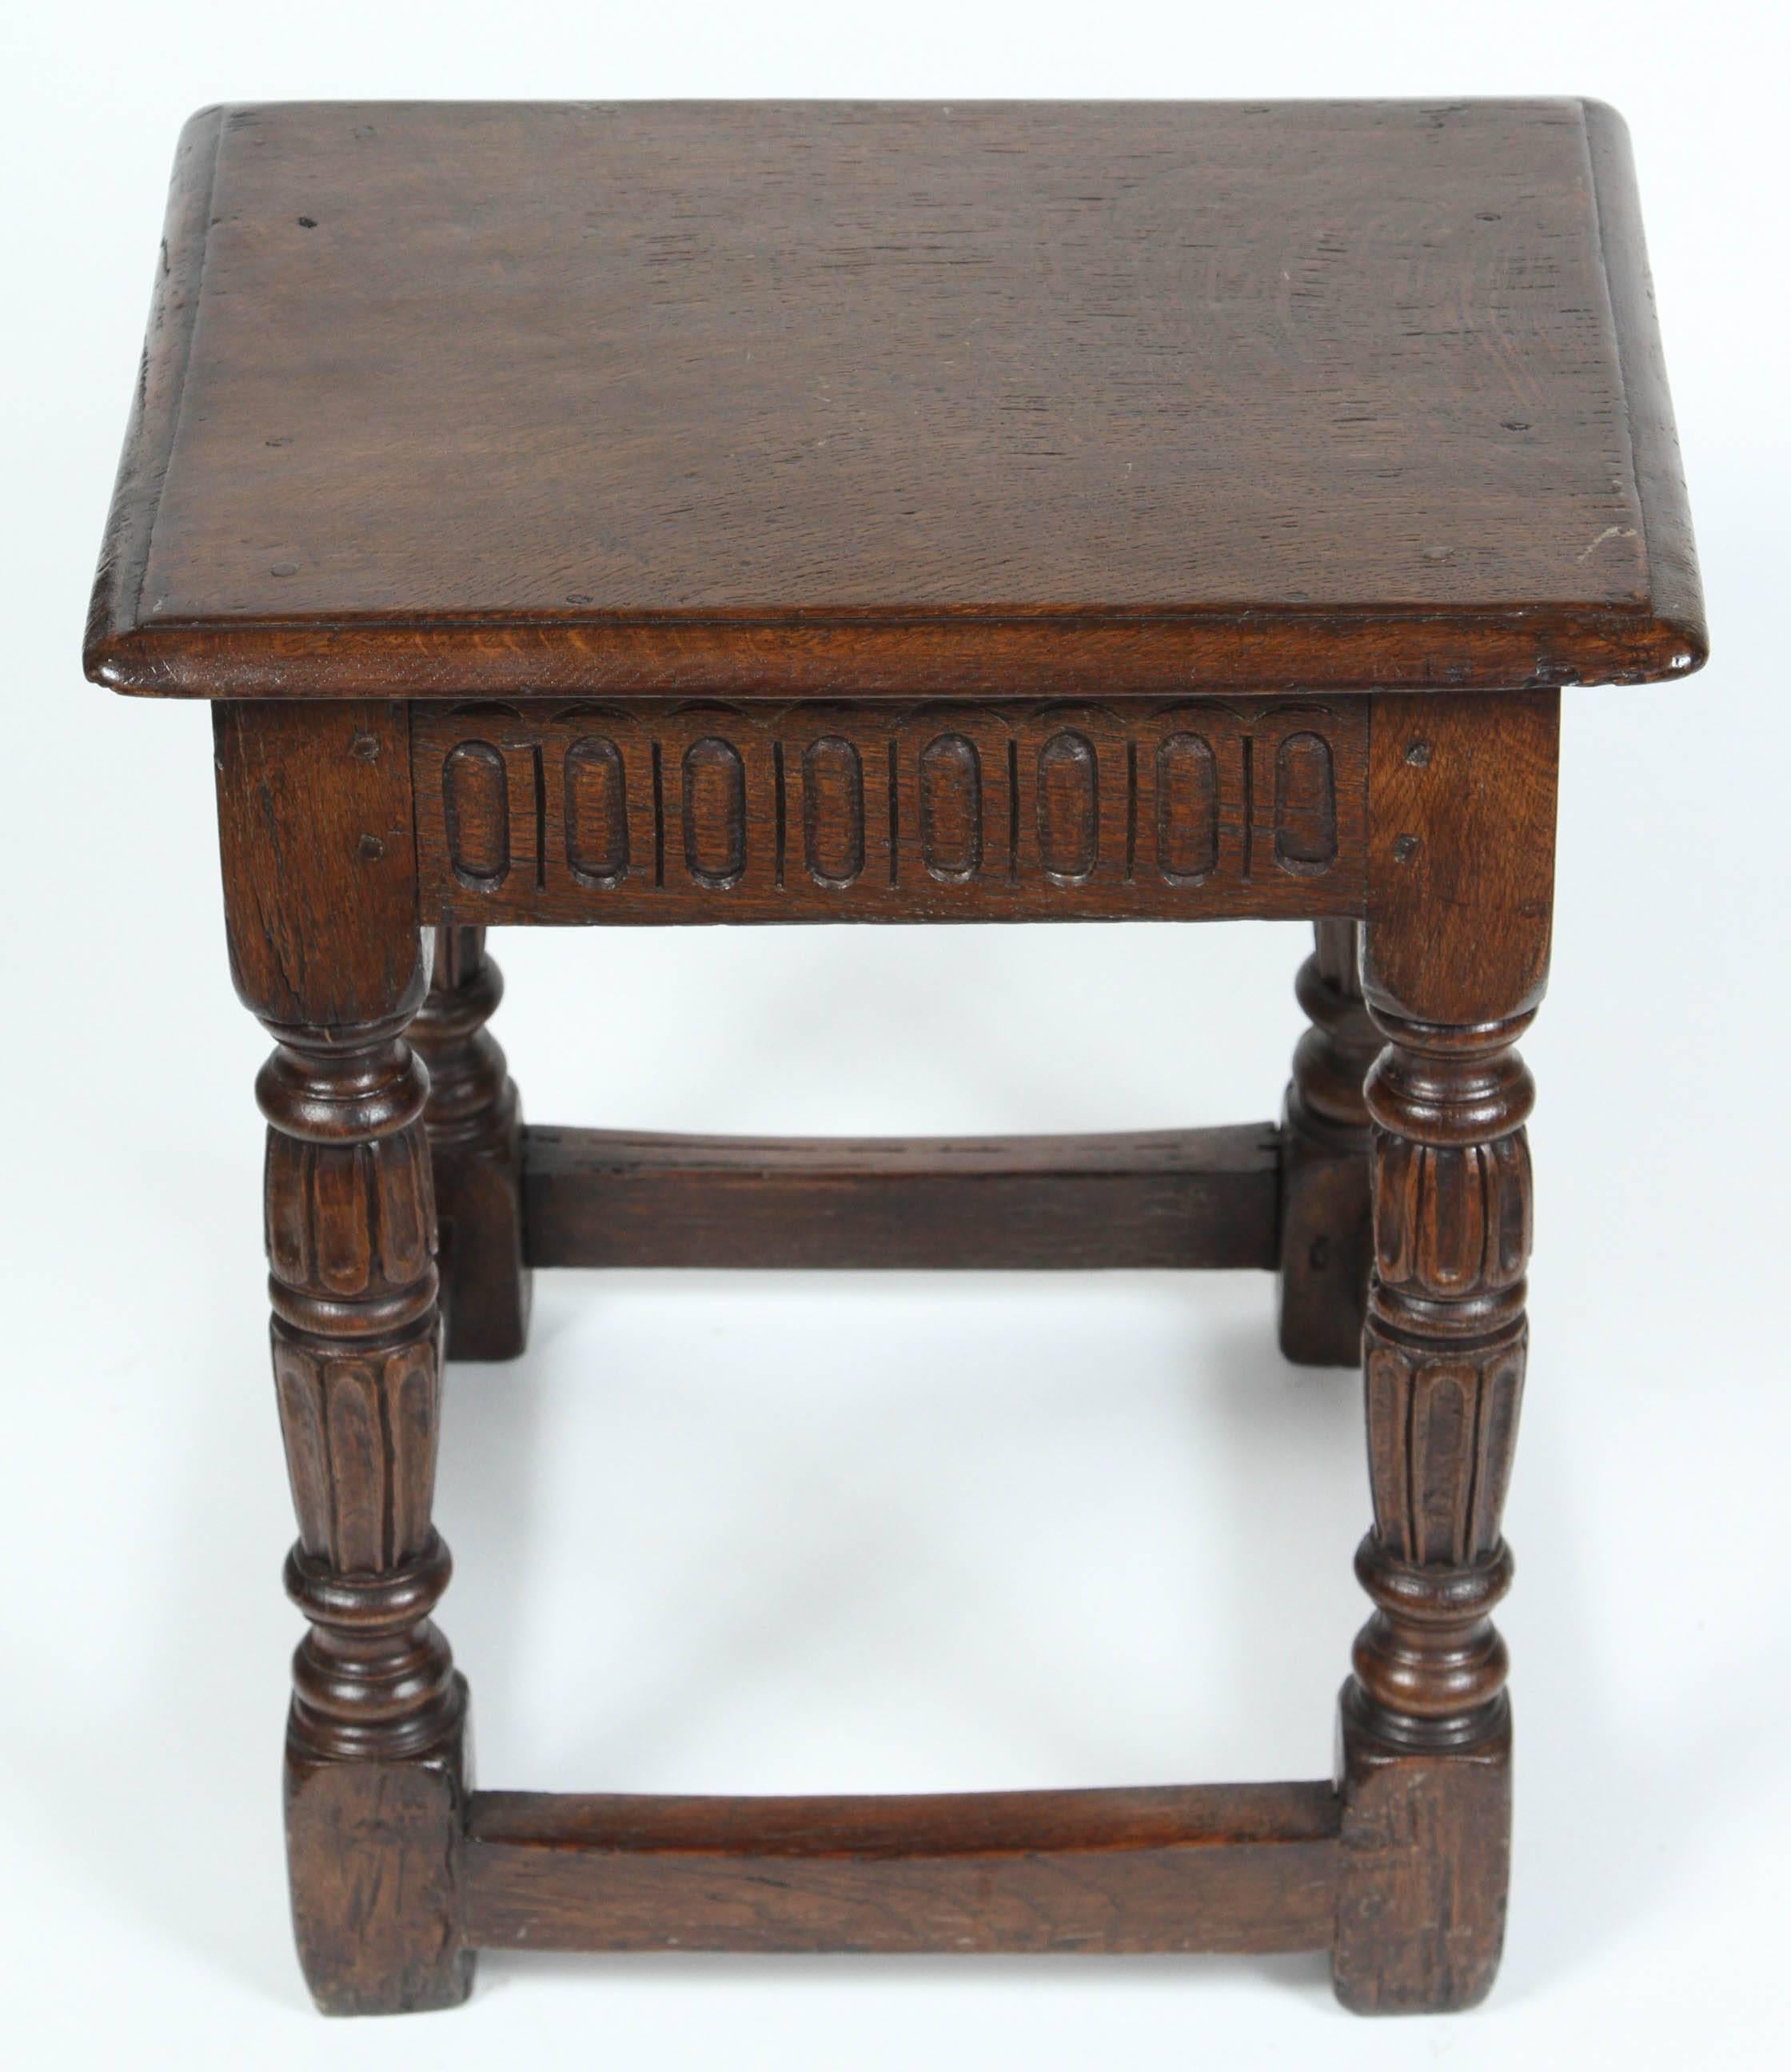 An early 17th century English joint stool. One of a near pair.